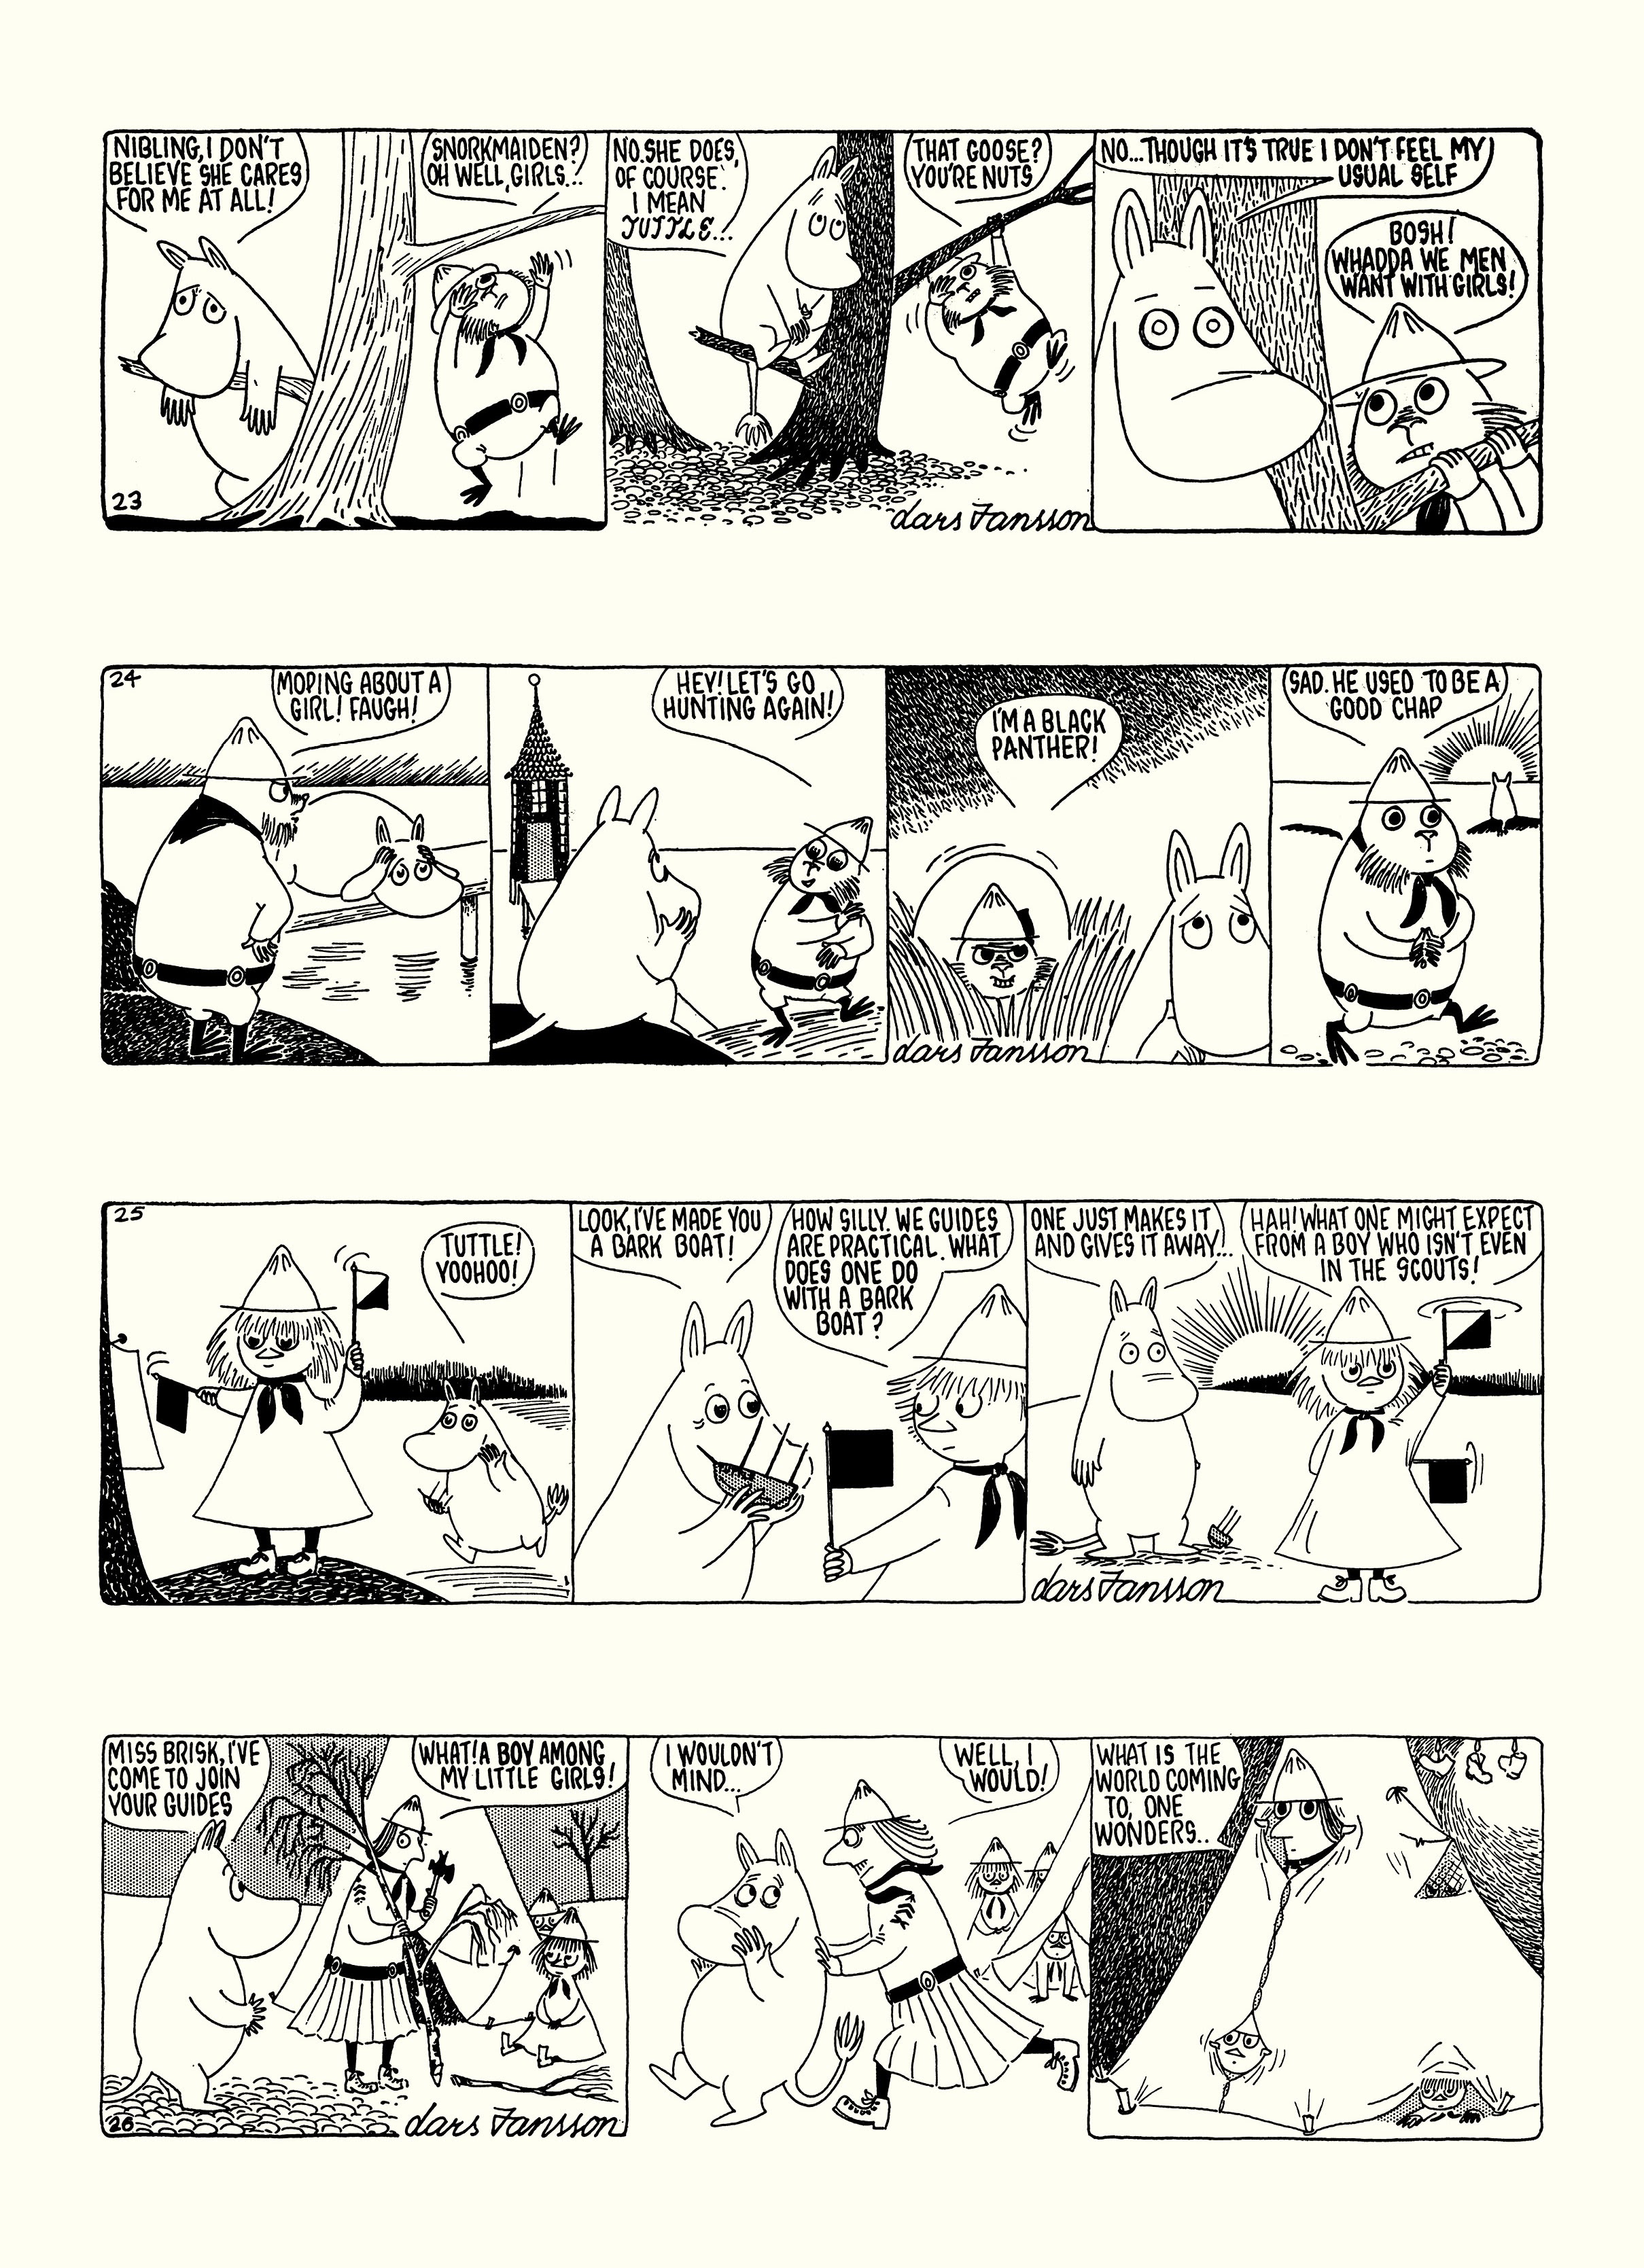 Read online Moomin: The Complete Lars Jansson Comic Strip comic -  Issue # TPB 7 - 33